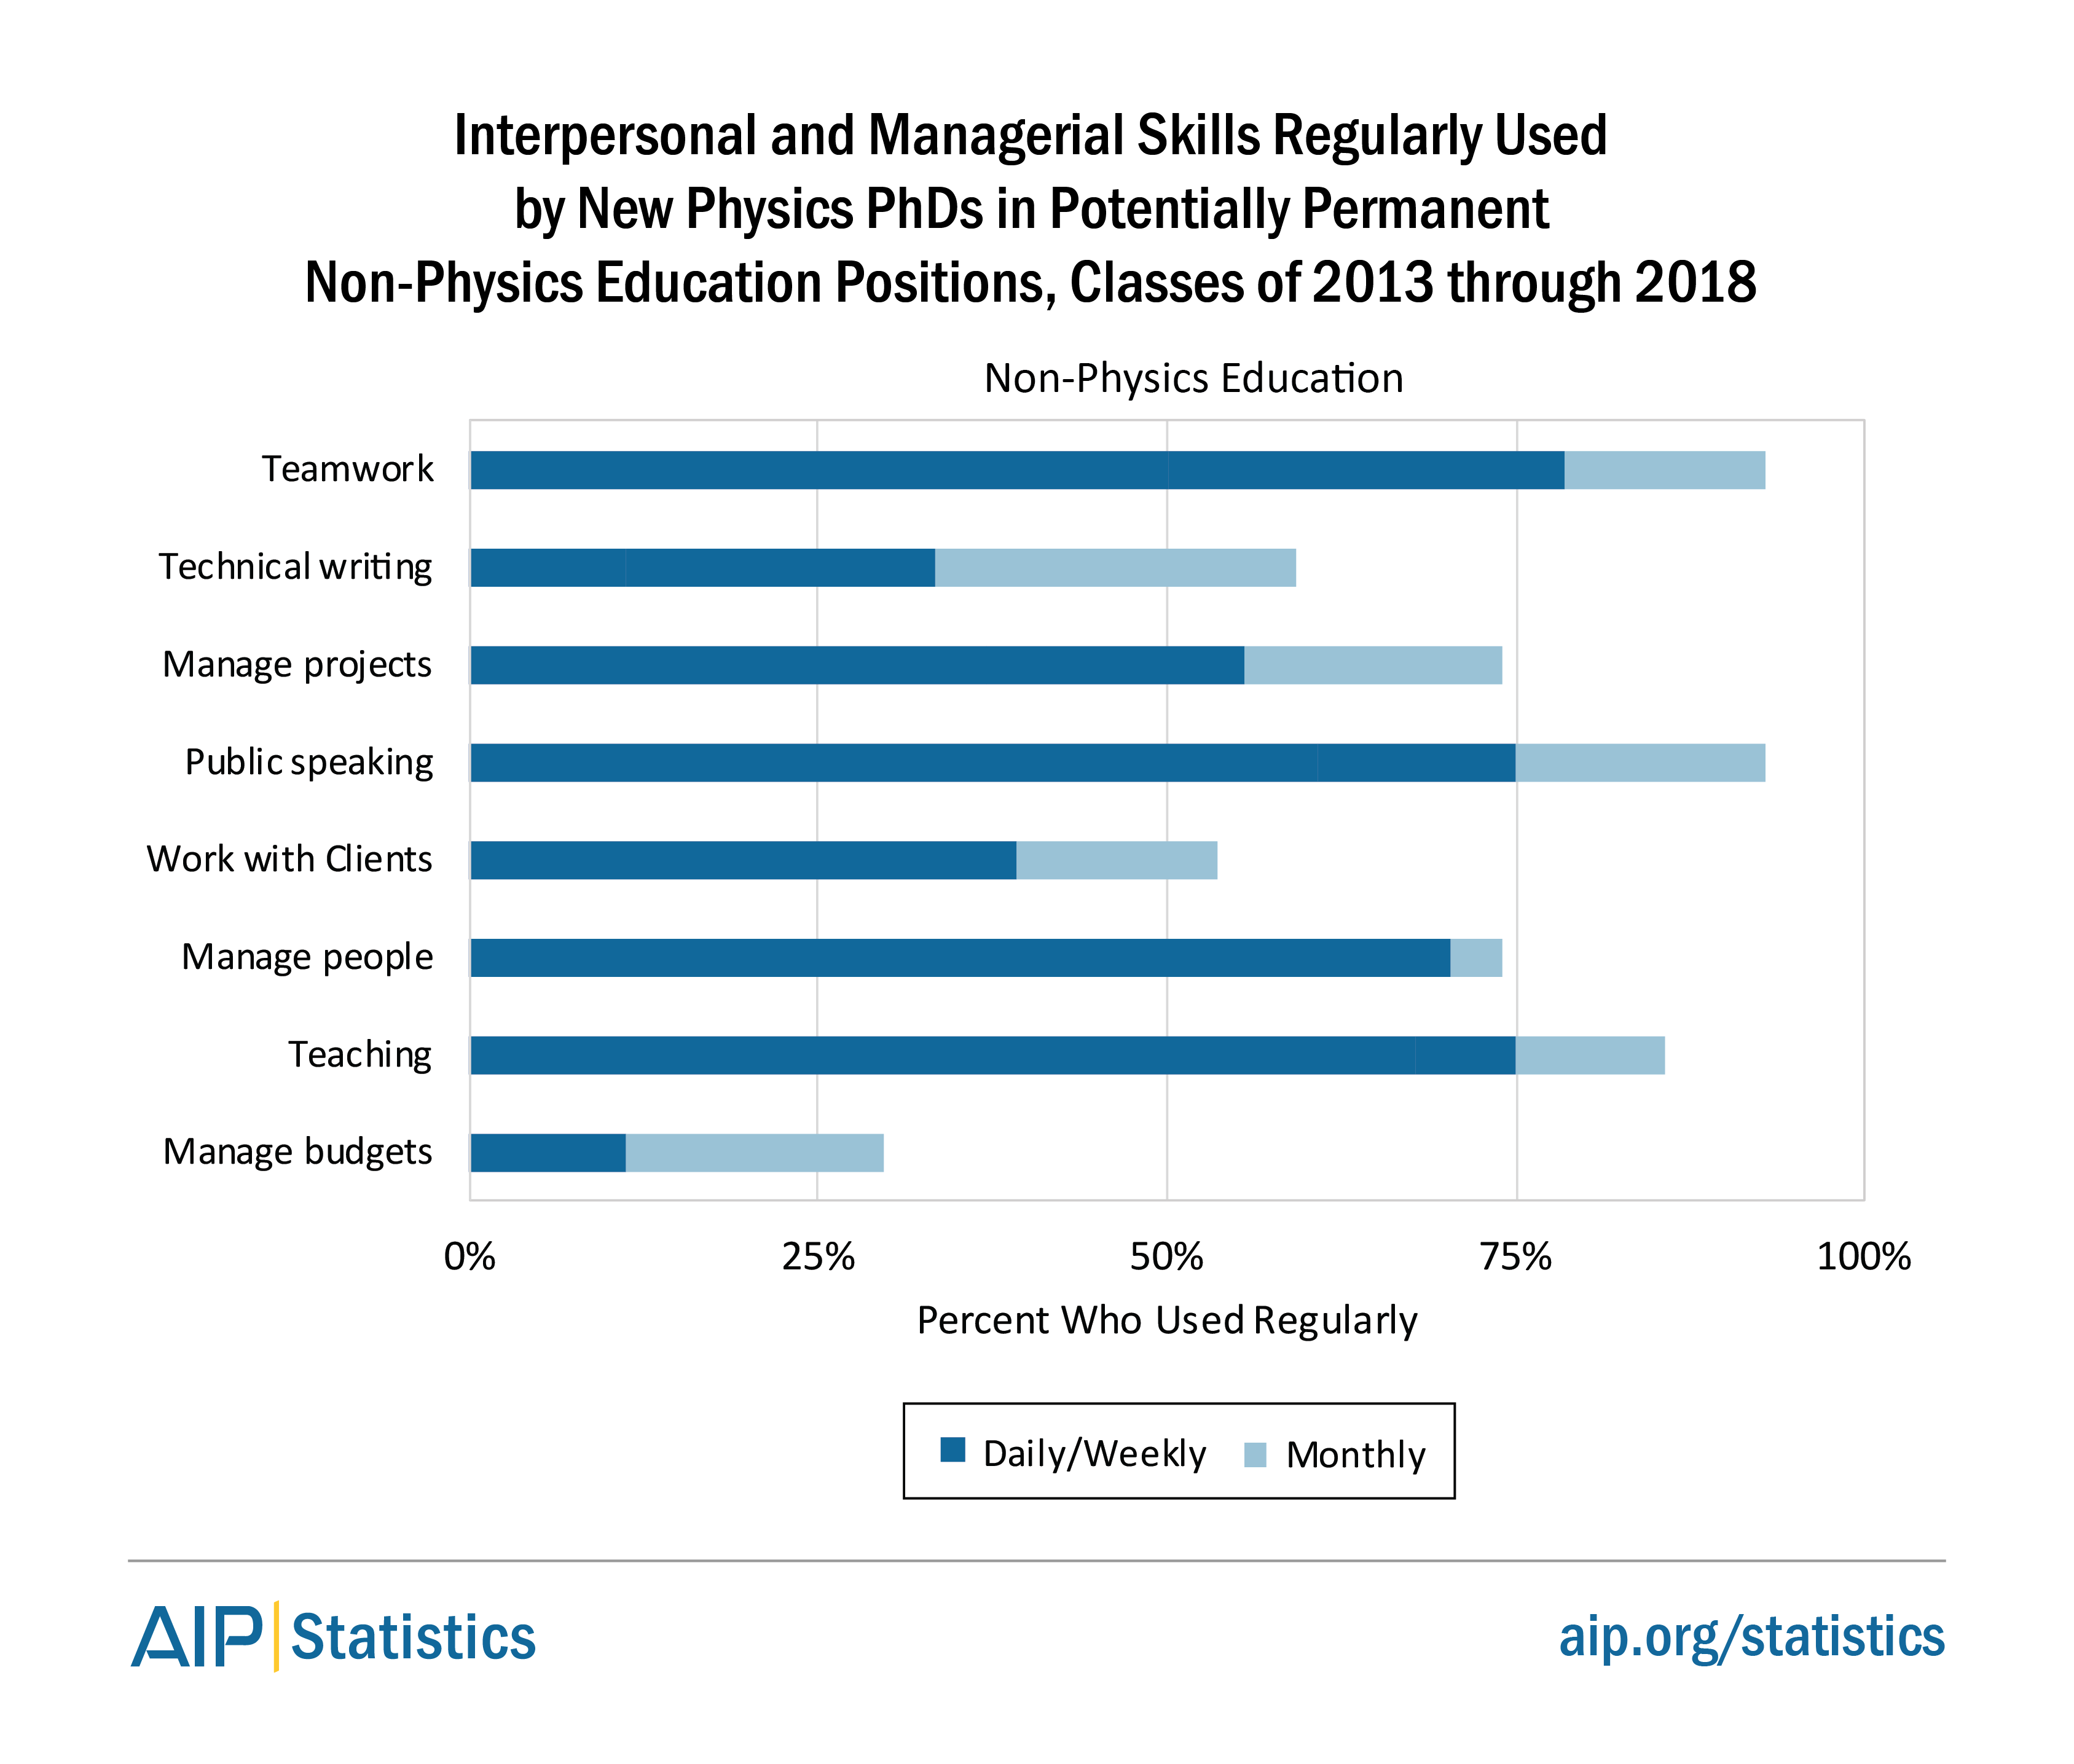 Interpersonal and Managerial Skills Used by Physics PhDs in Non-Physics Education Positions